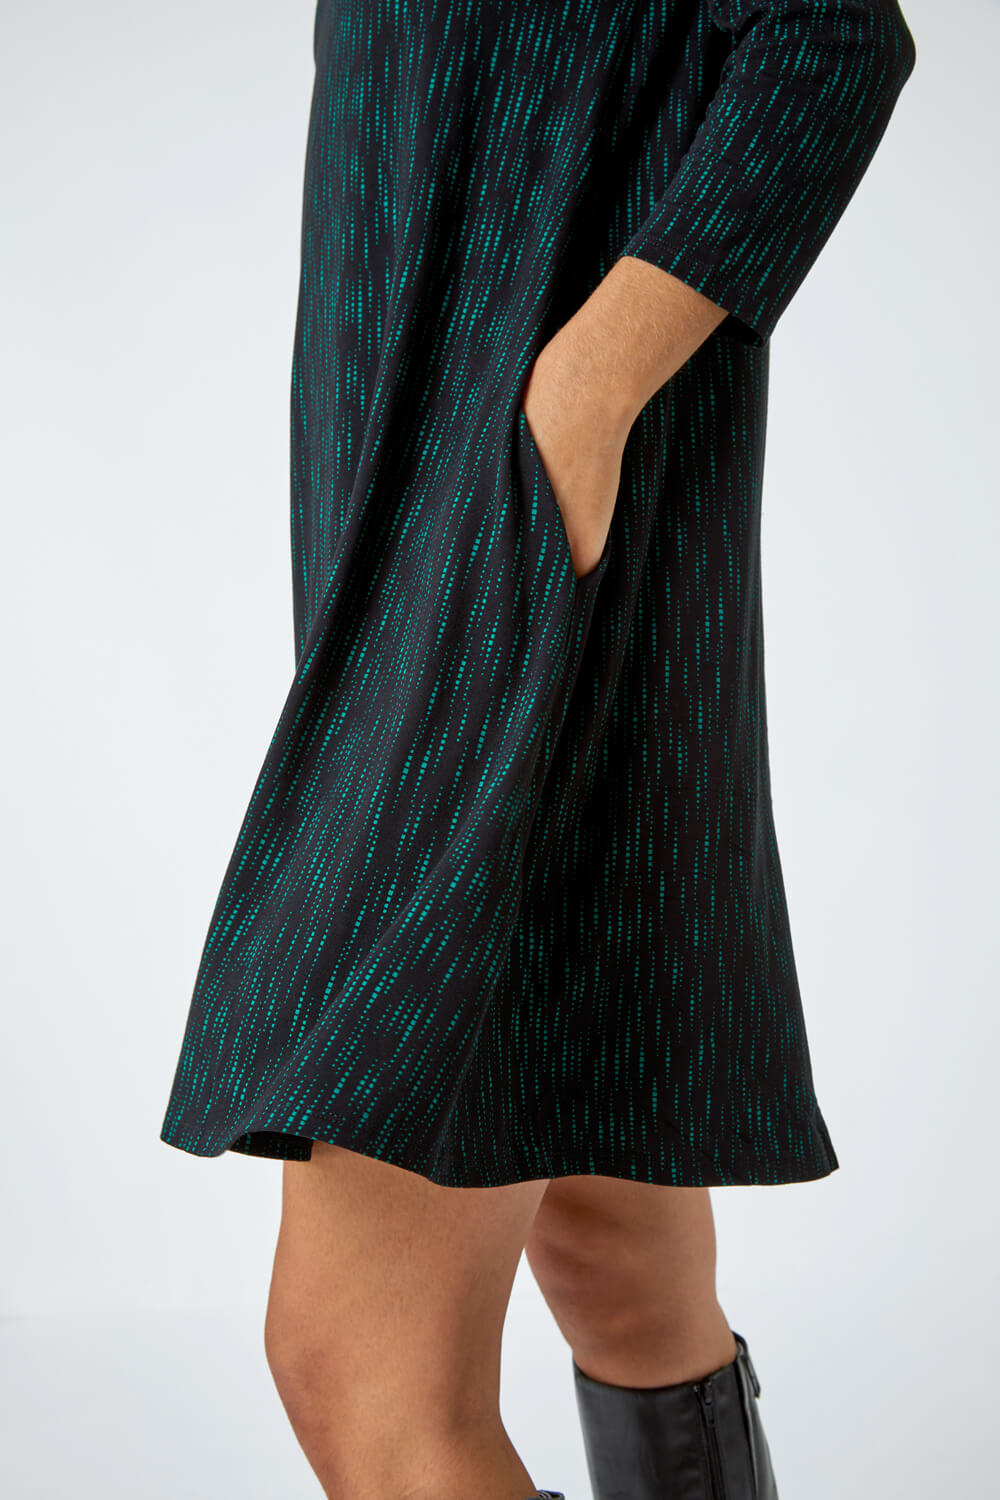 Black Abstract Square Neck Stretch Dress, Image 5 of 5